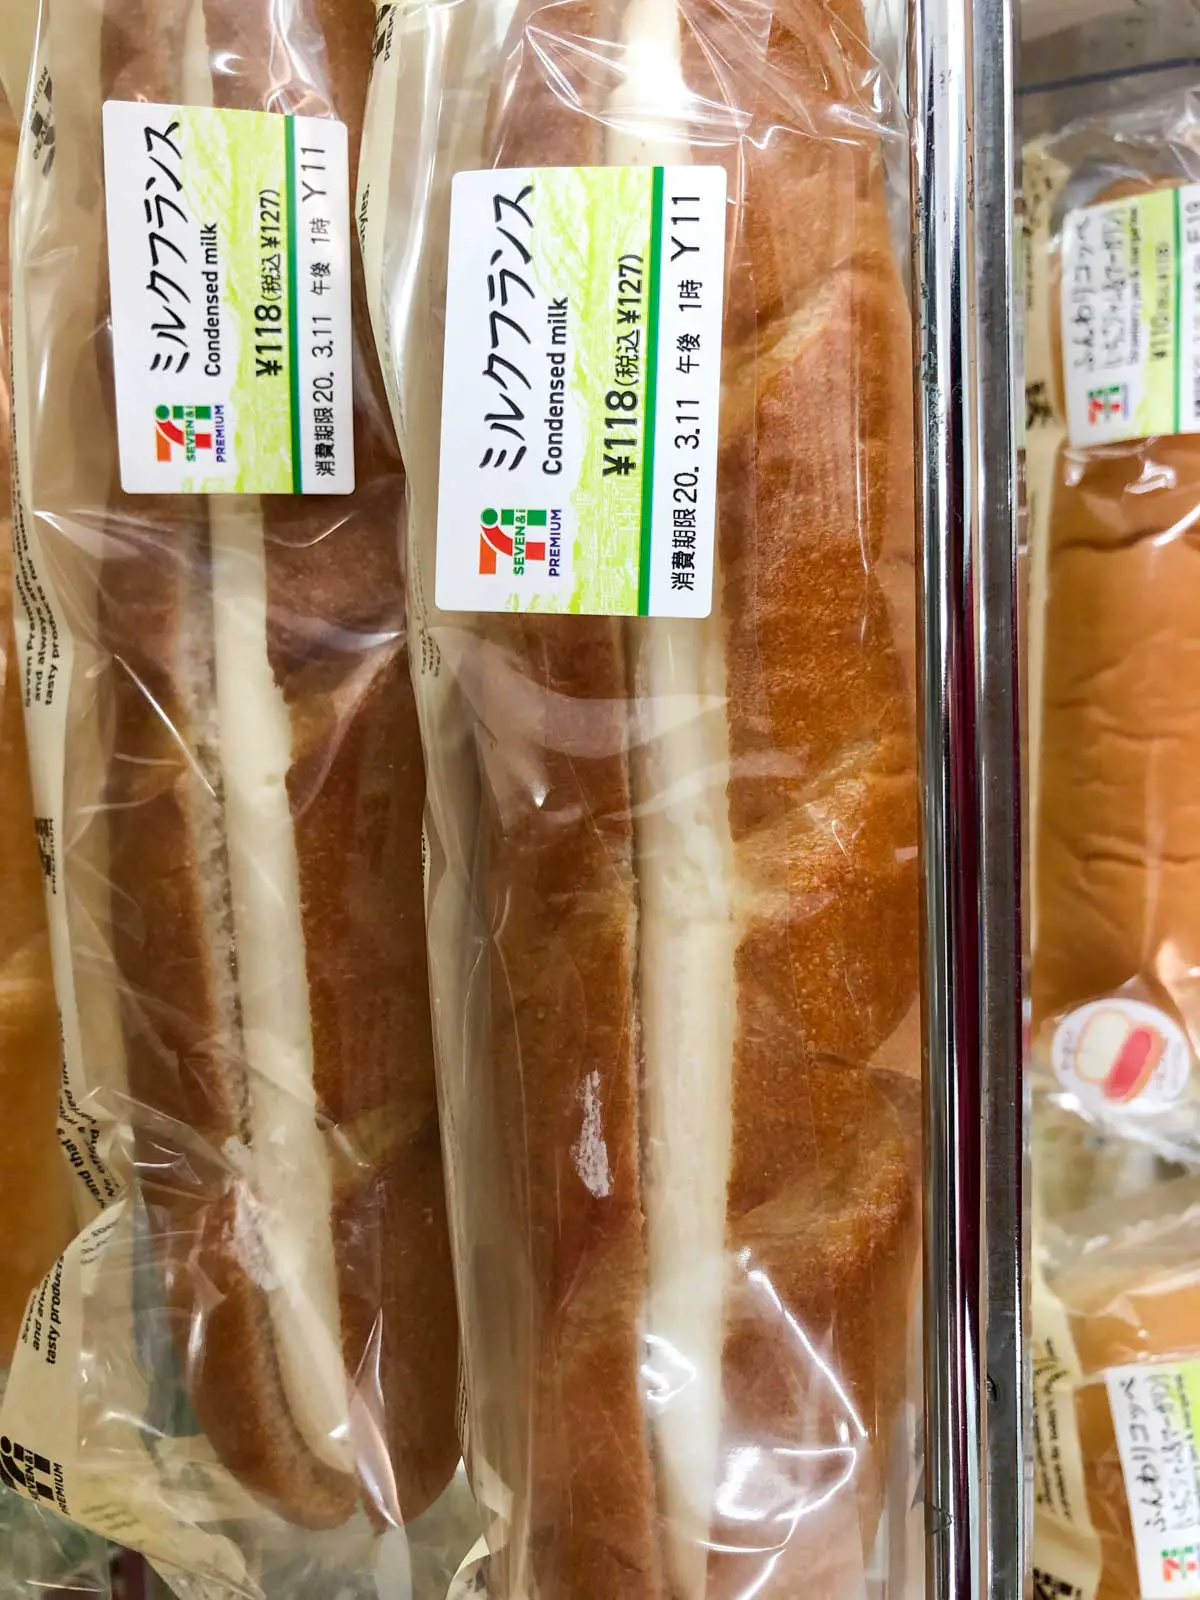 Packages of Condensed Milk breads from 7 Eleven Japan.